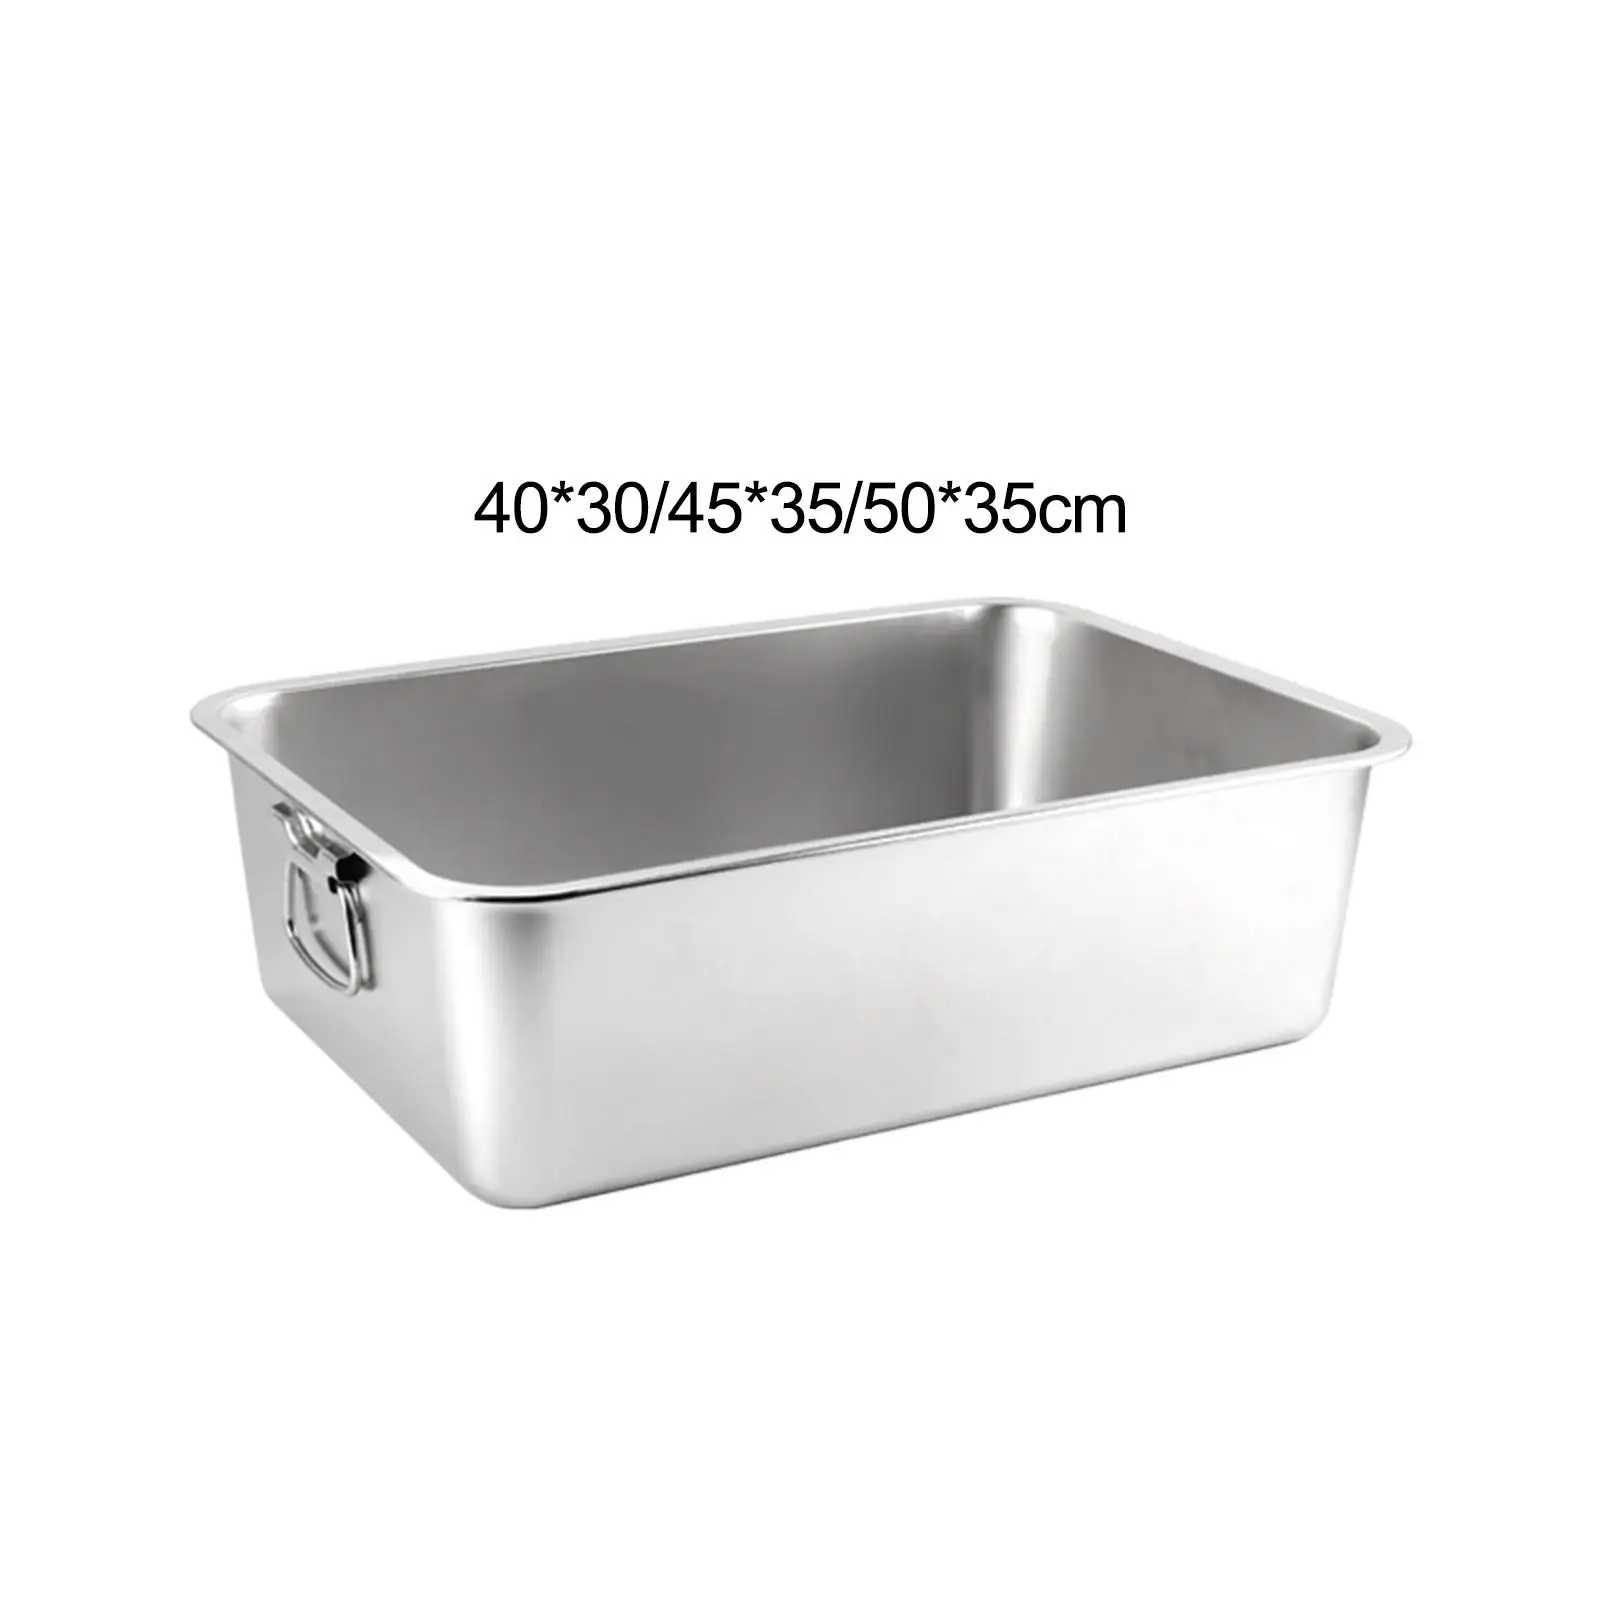 Open Litter Box for Indoor Cats, Kitten Potty Toilet Stainless Steel Container Kitten Potty Pan for Small Large Cats